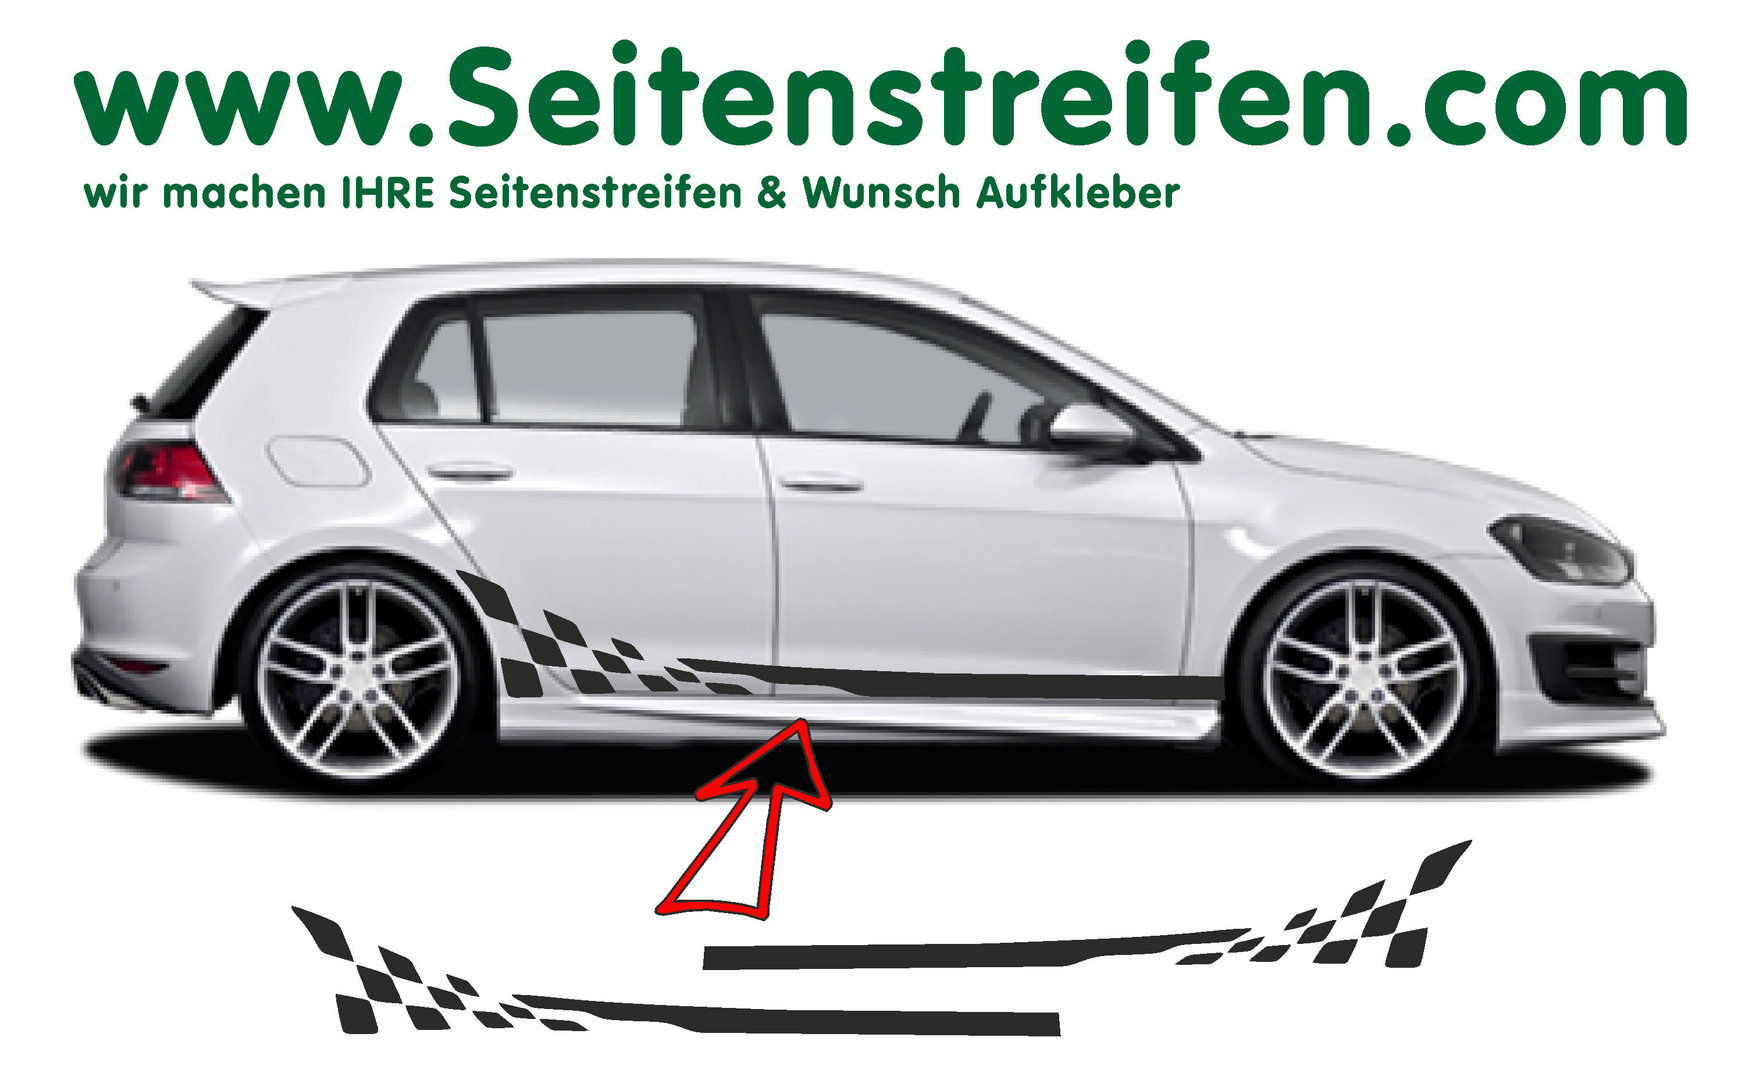 VW Golf - Checker for 3 & 4 Doors - Side Stripes Graphics Decals Sticker Kit - N° 8484